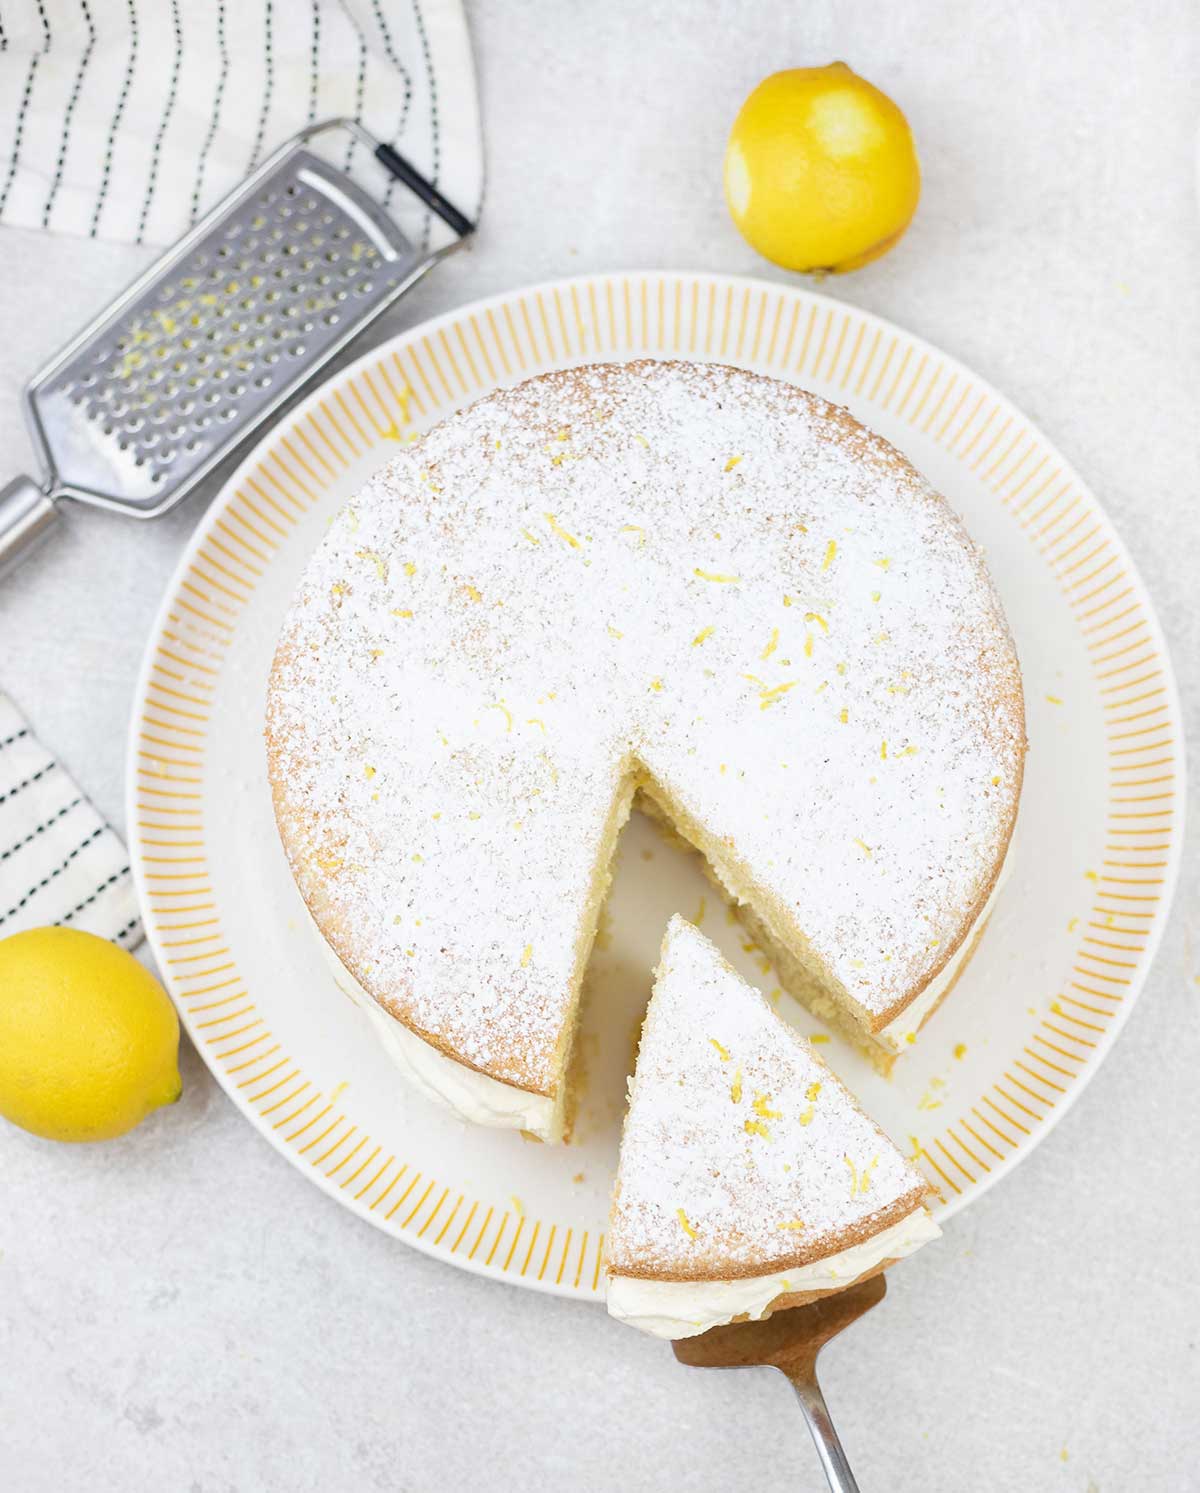 Lemon Victoria sponge and some lemons are in the background.